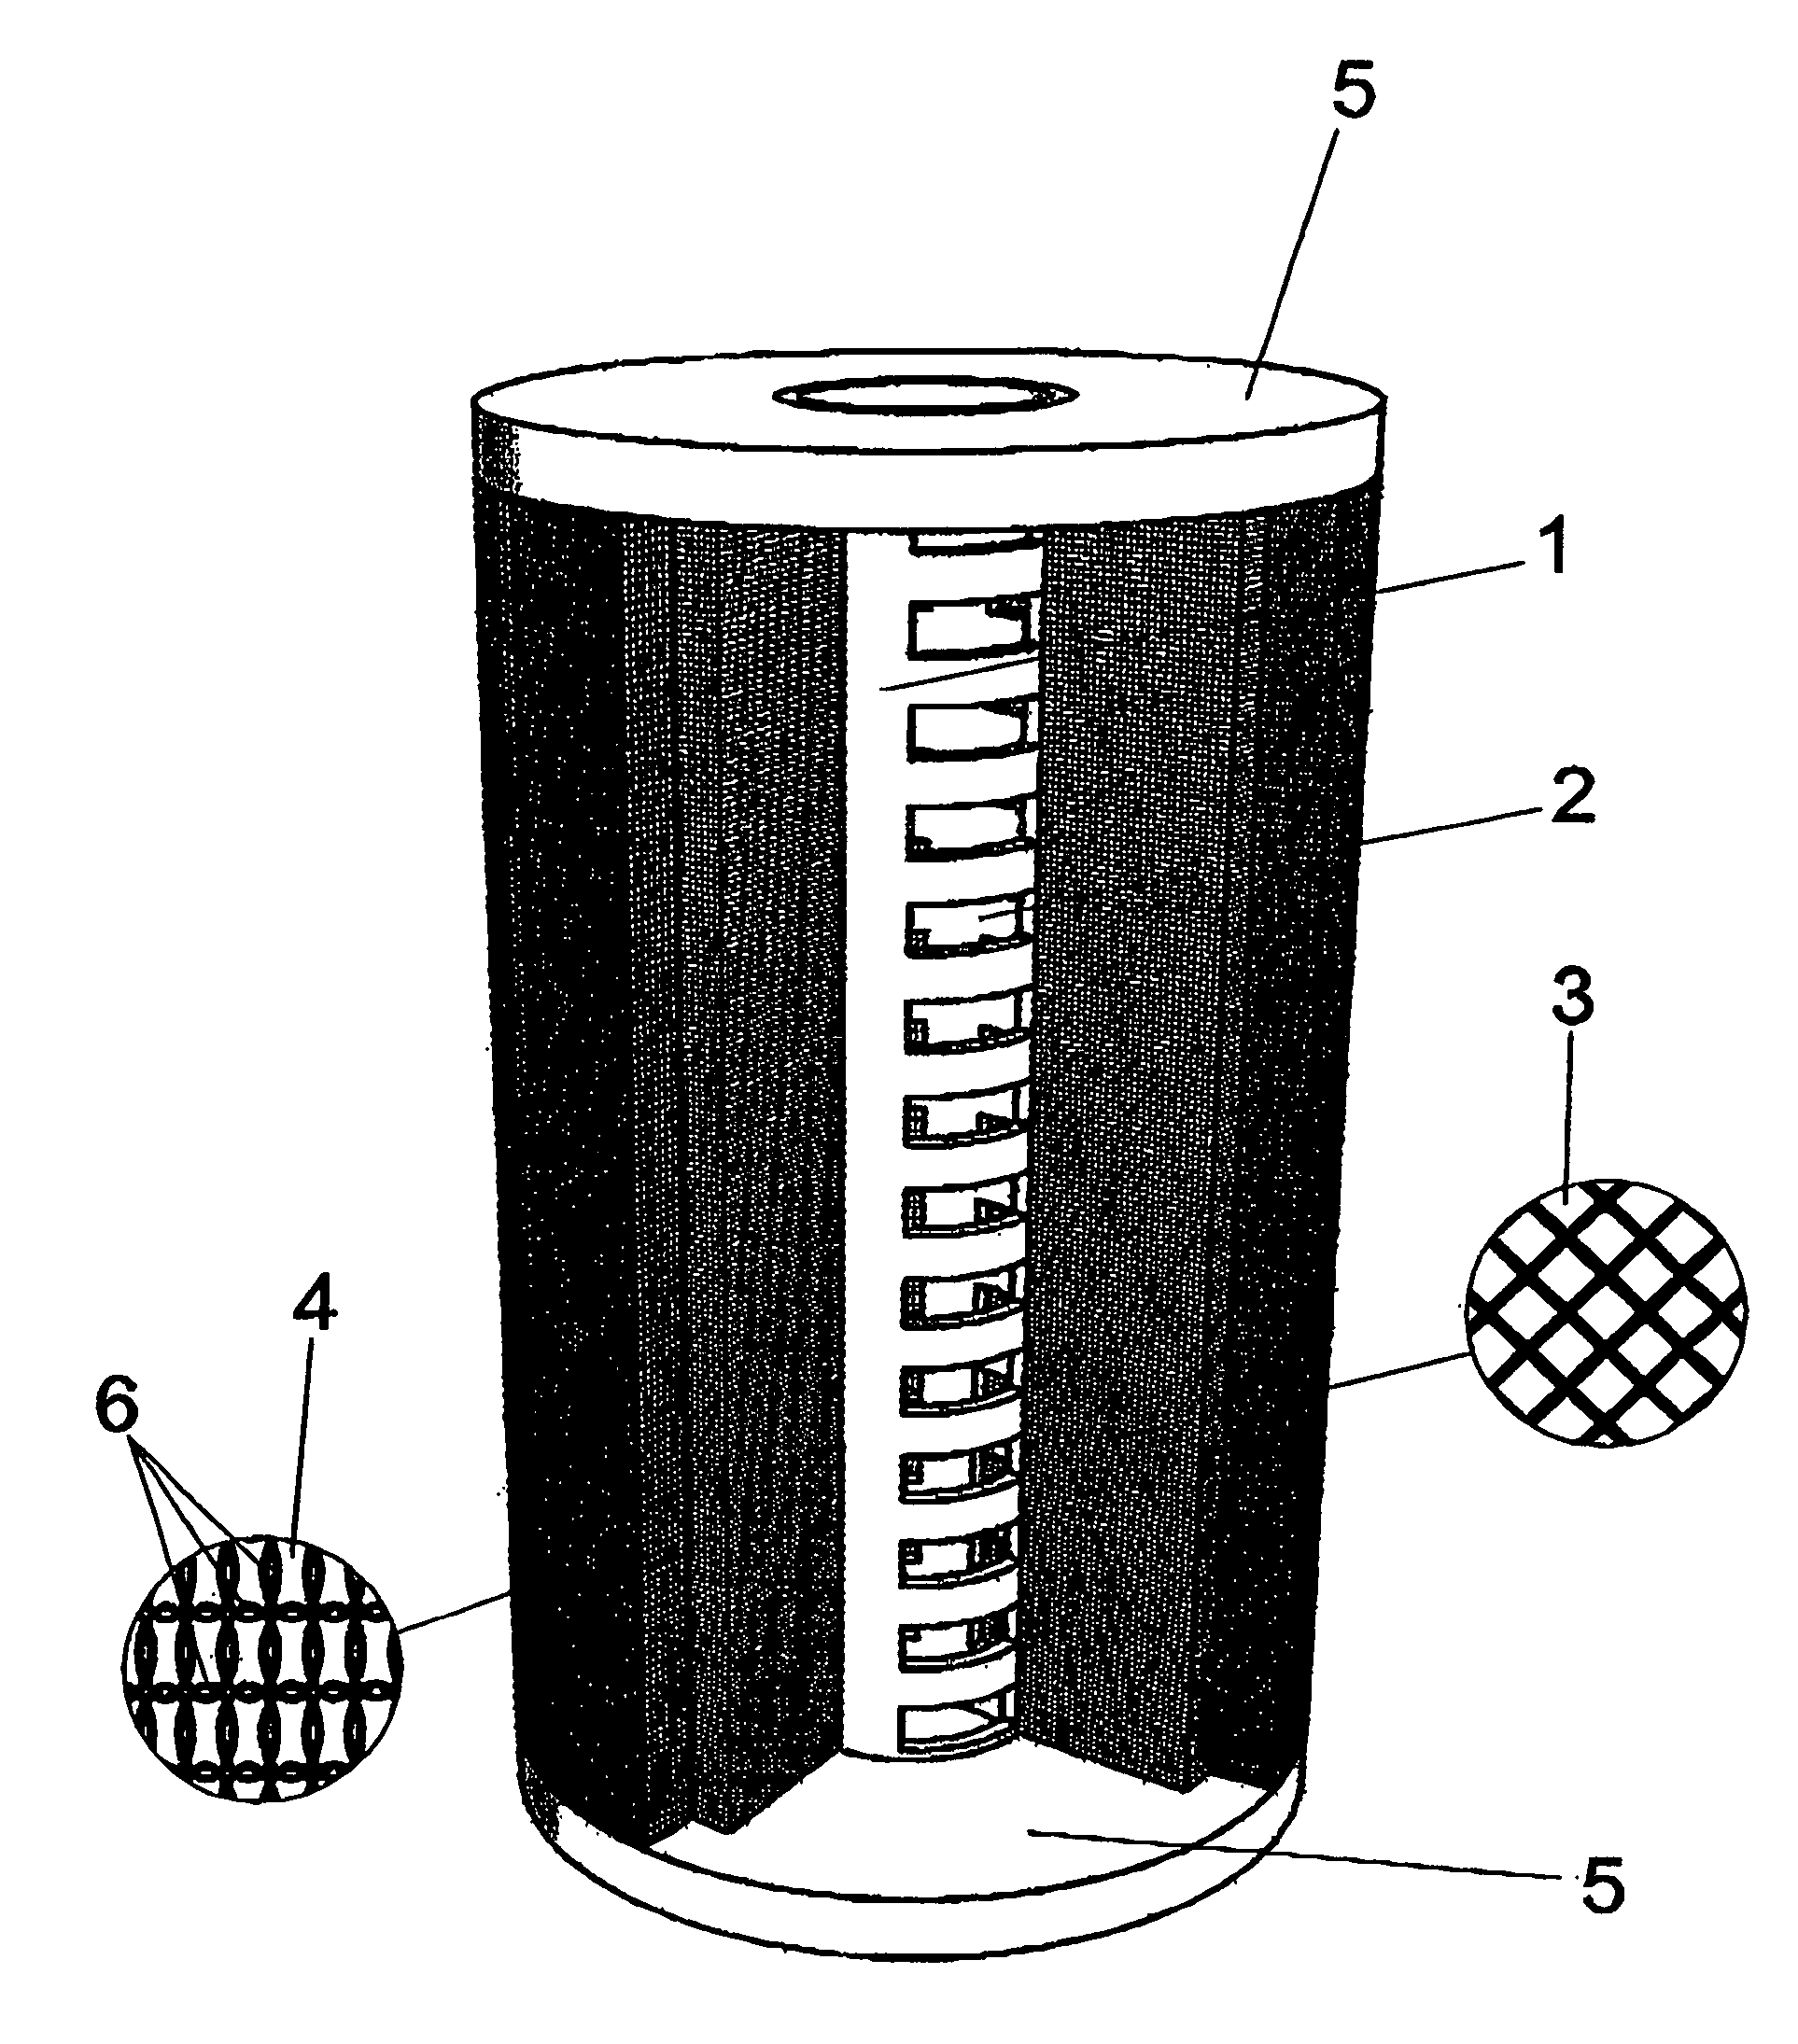 Multi-layer filtering cartridge for filtration of liquids